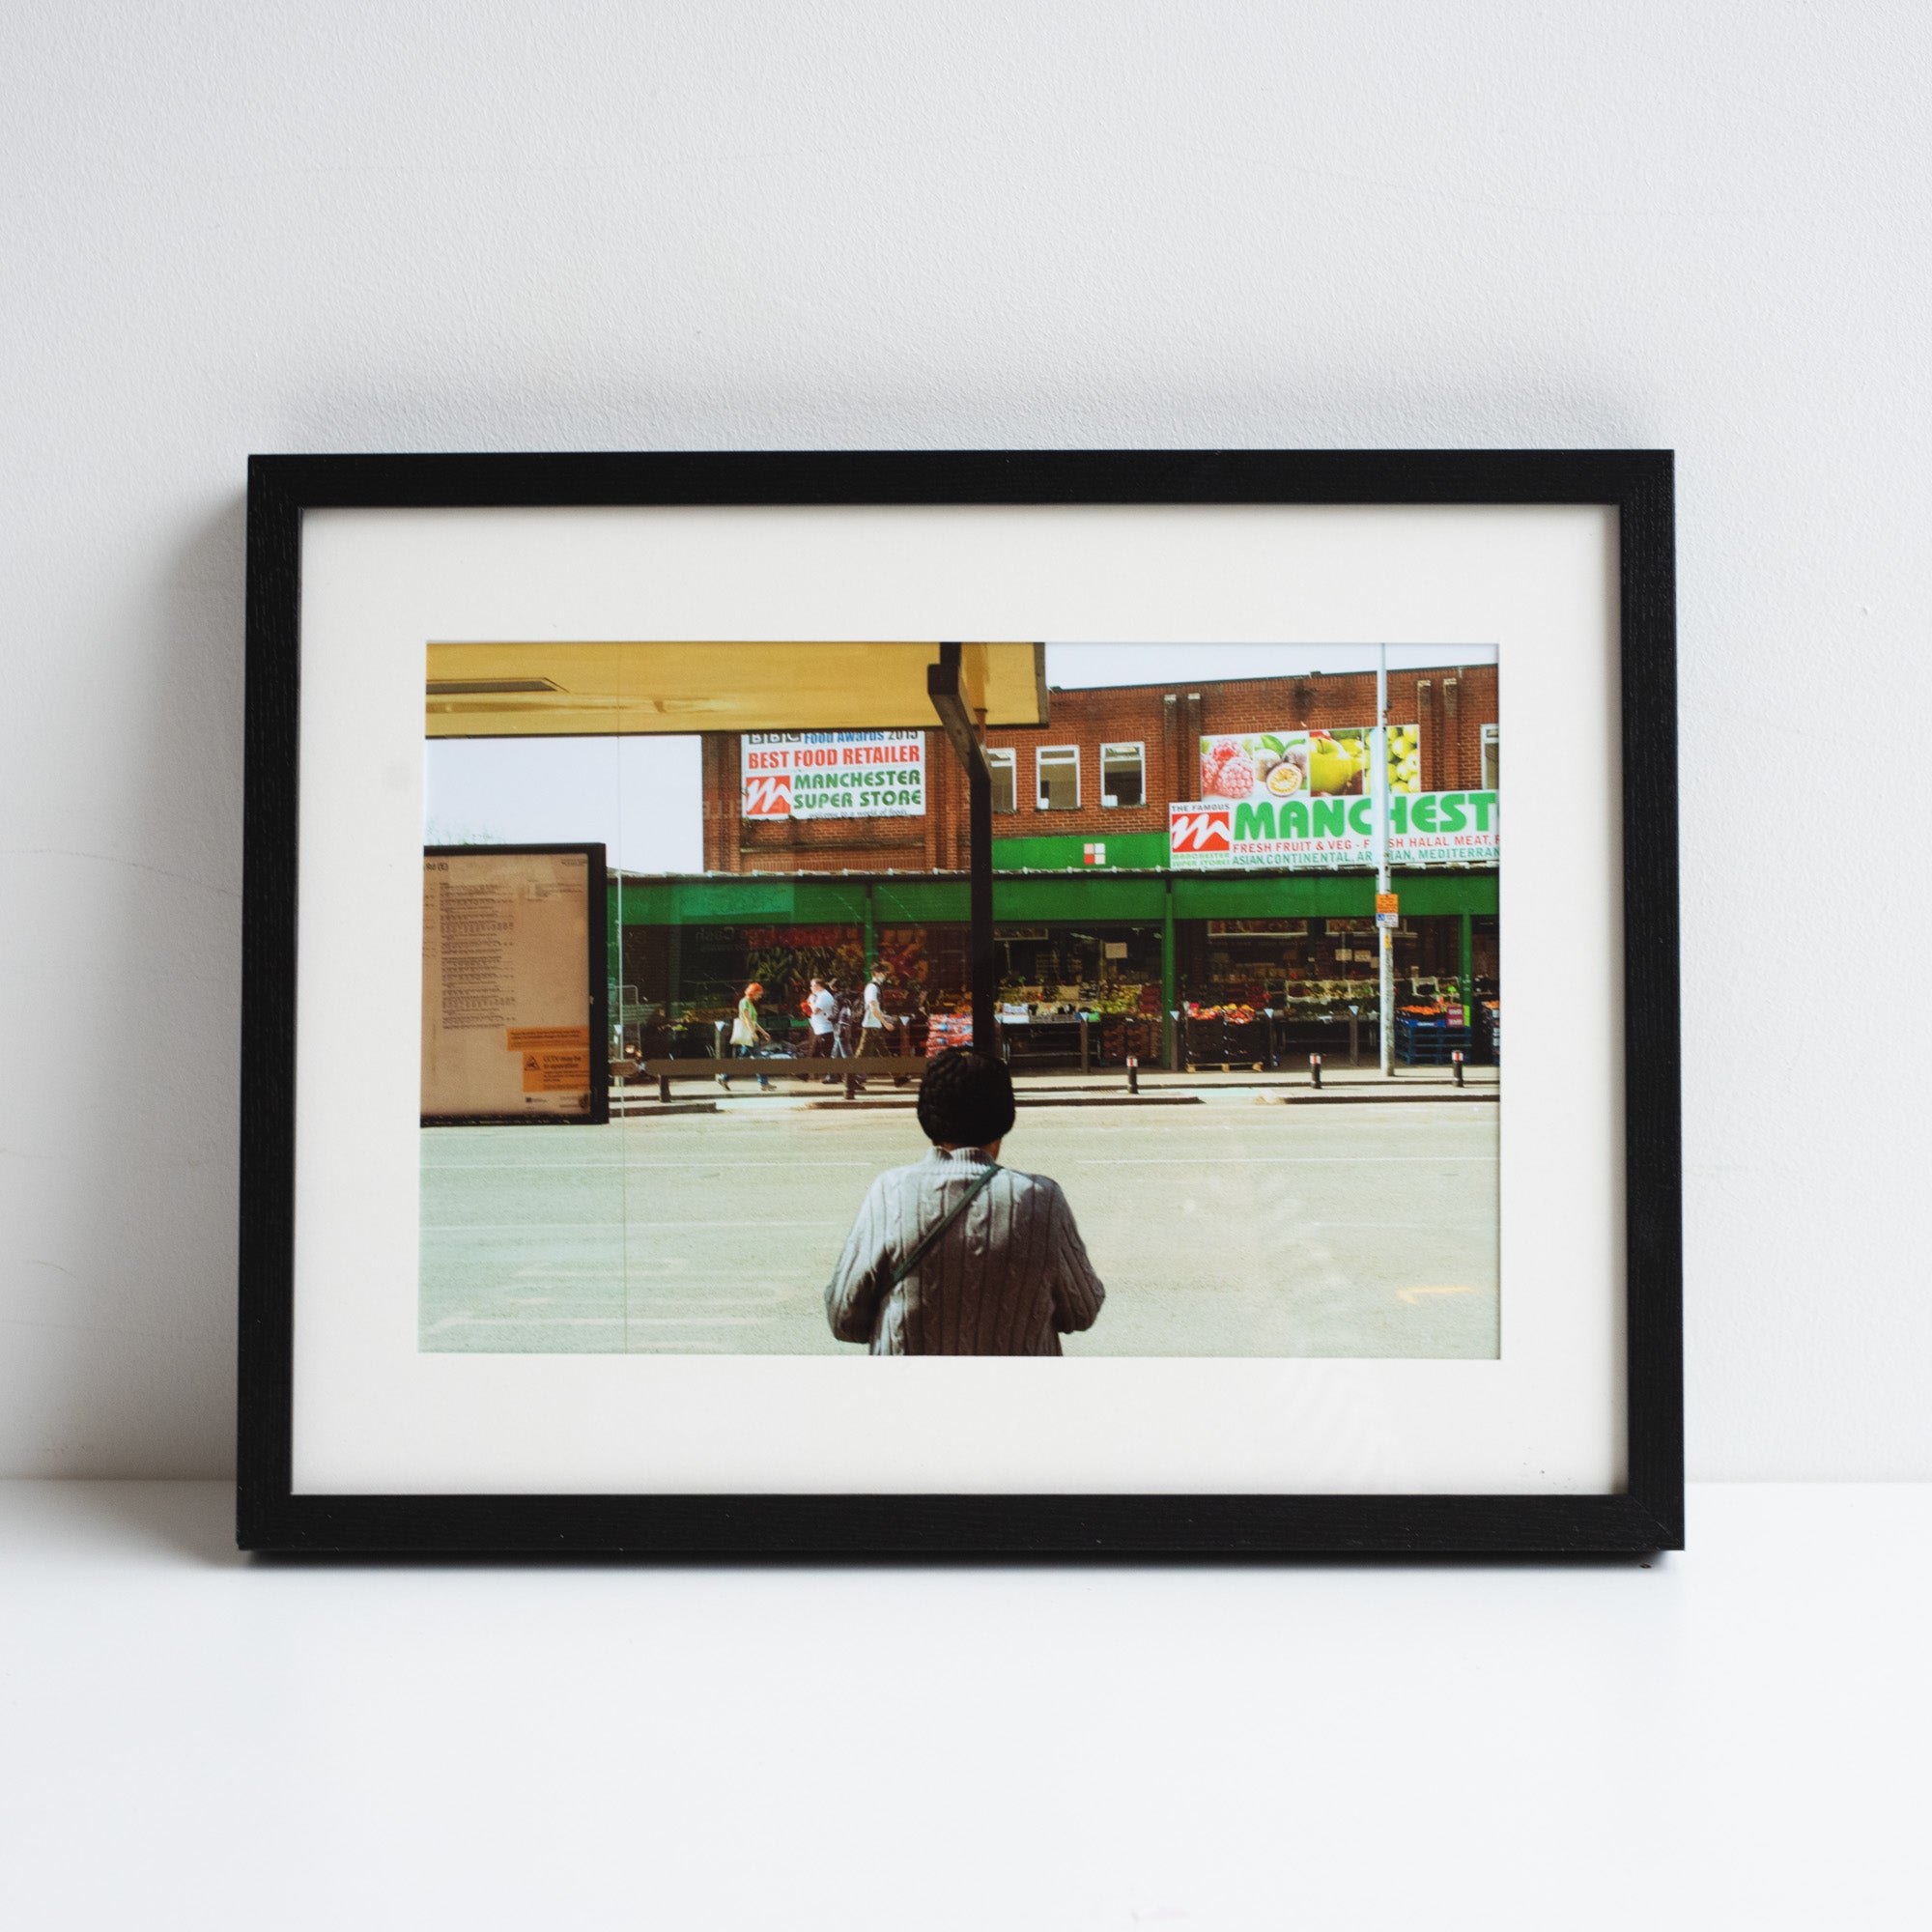 A printed reproduction of a photograph by Chris Naylor of a man looking our to a groceries shop in Manchester. Placed in a black frame leaning against a white wall.